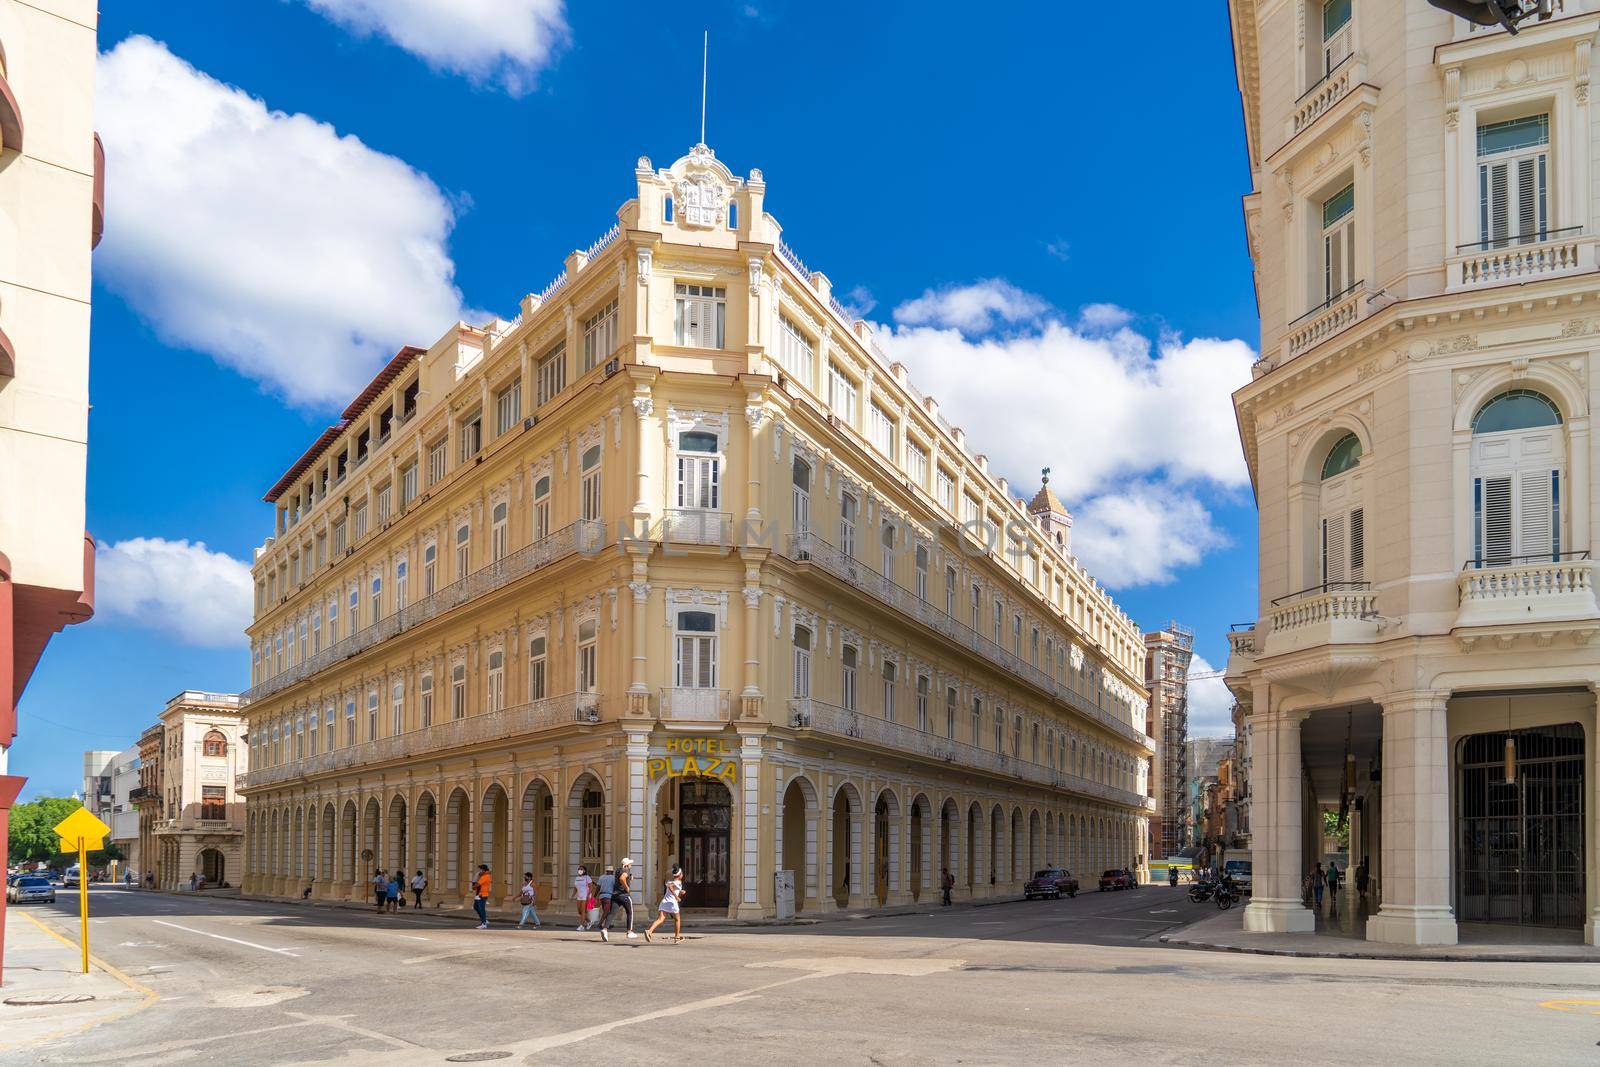 Havana Cuba. November 25, 2020: Exterior view of the Inglaterra hotel in Havana, a place visited by tourists